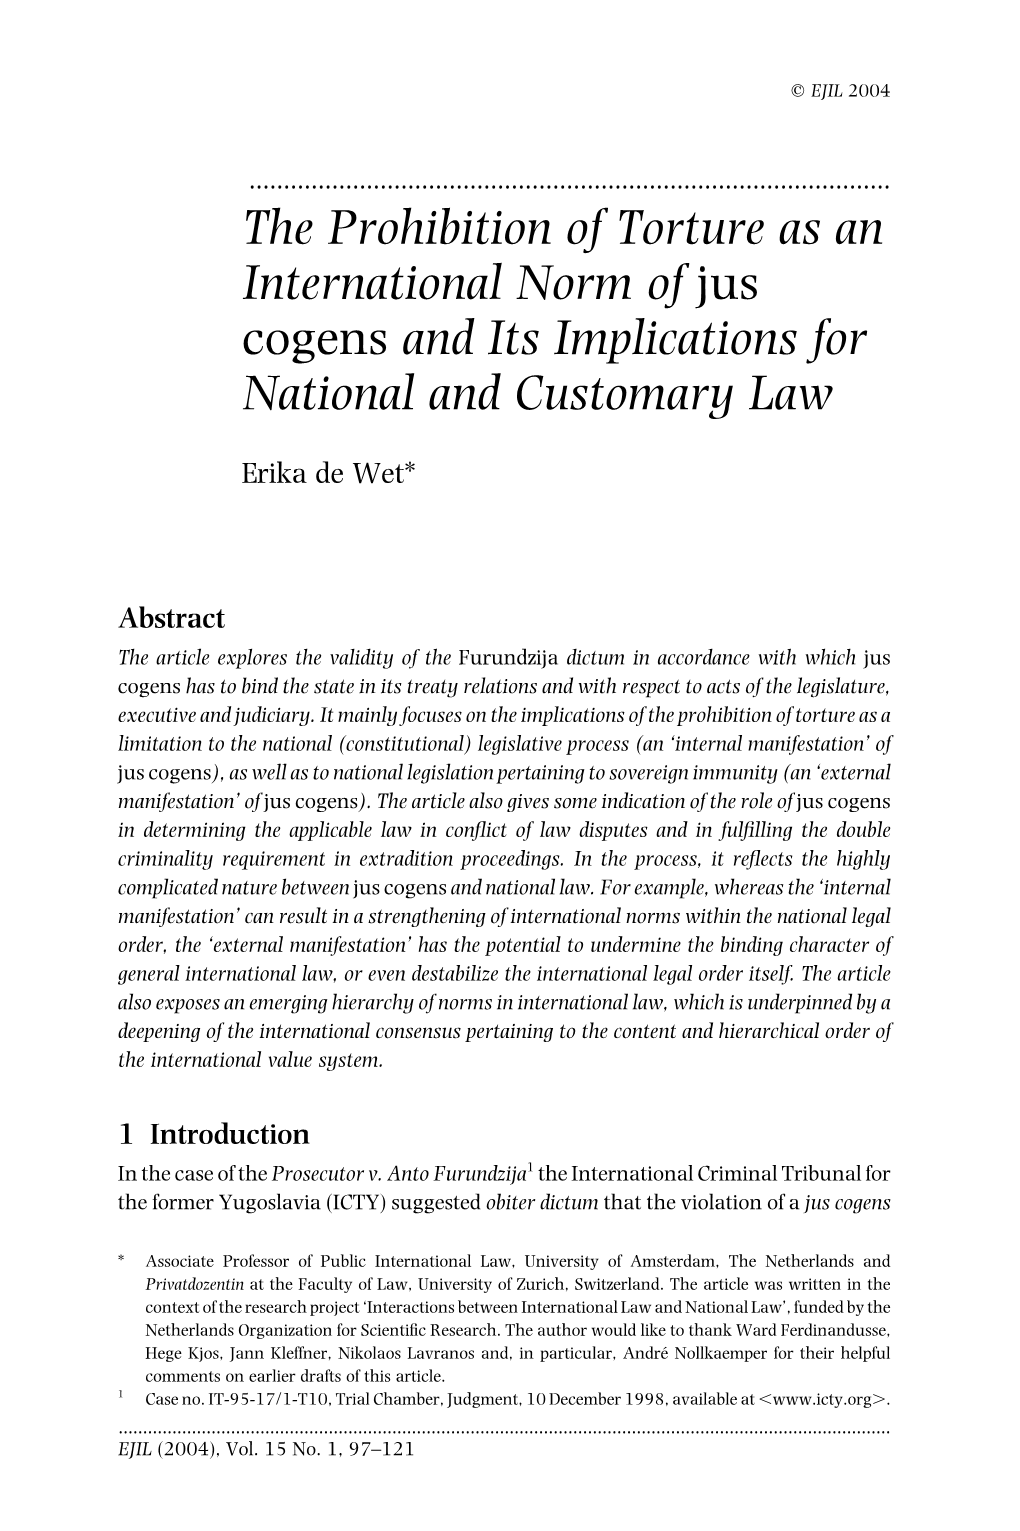 The Prohibition of Torture As an International Norm of Jus Cogens and Its Implications for National and Customary Law